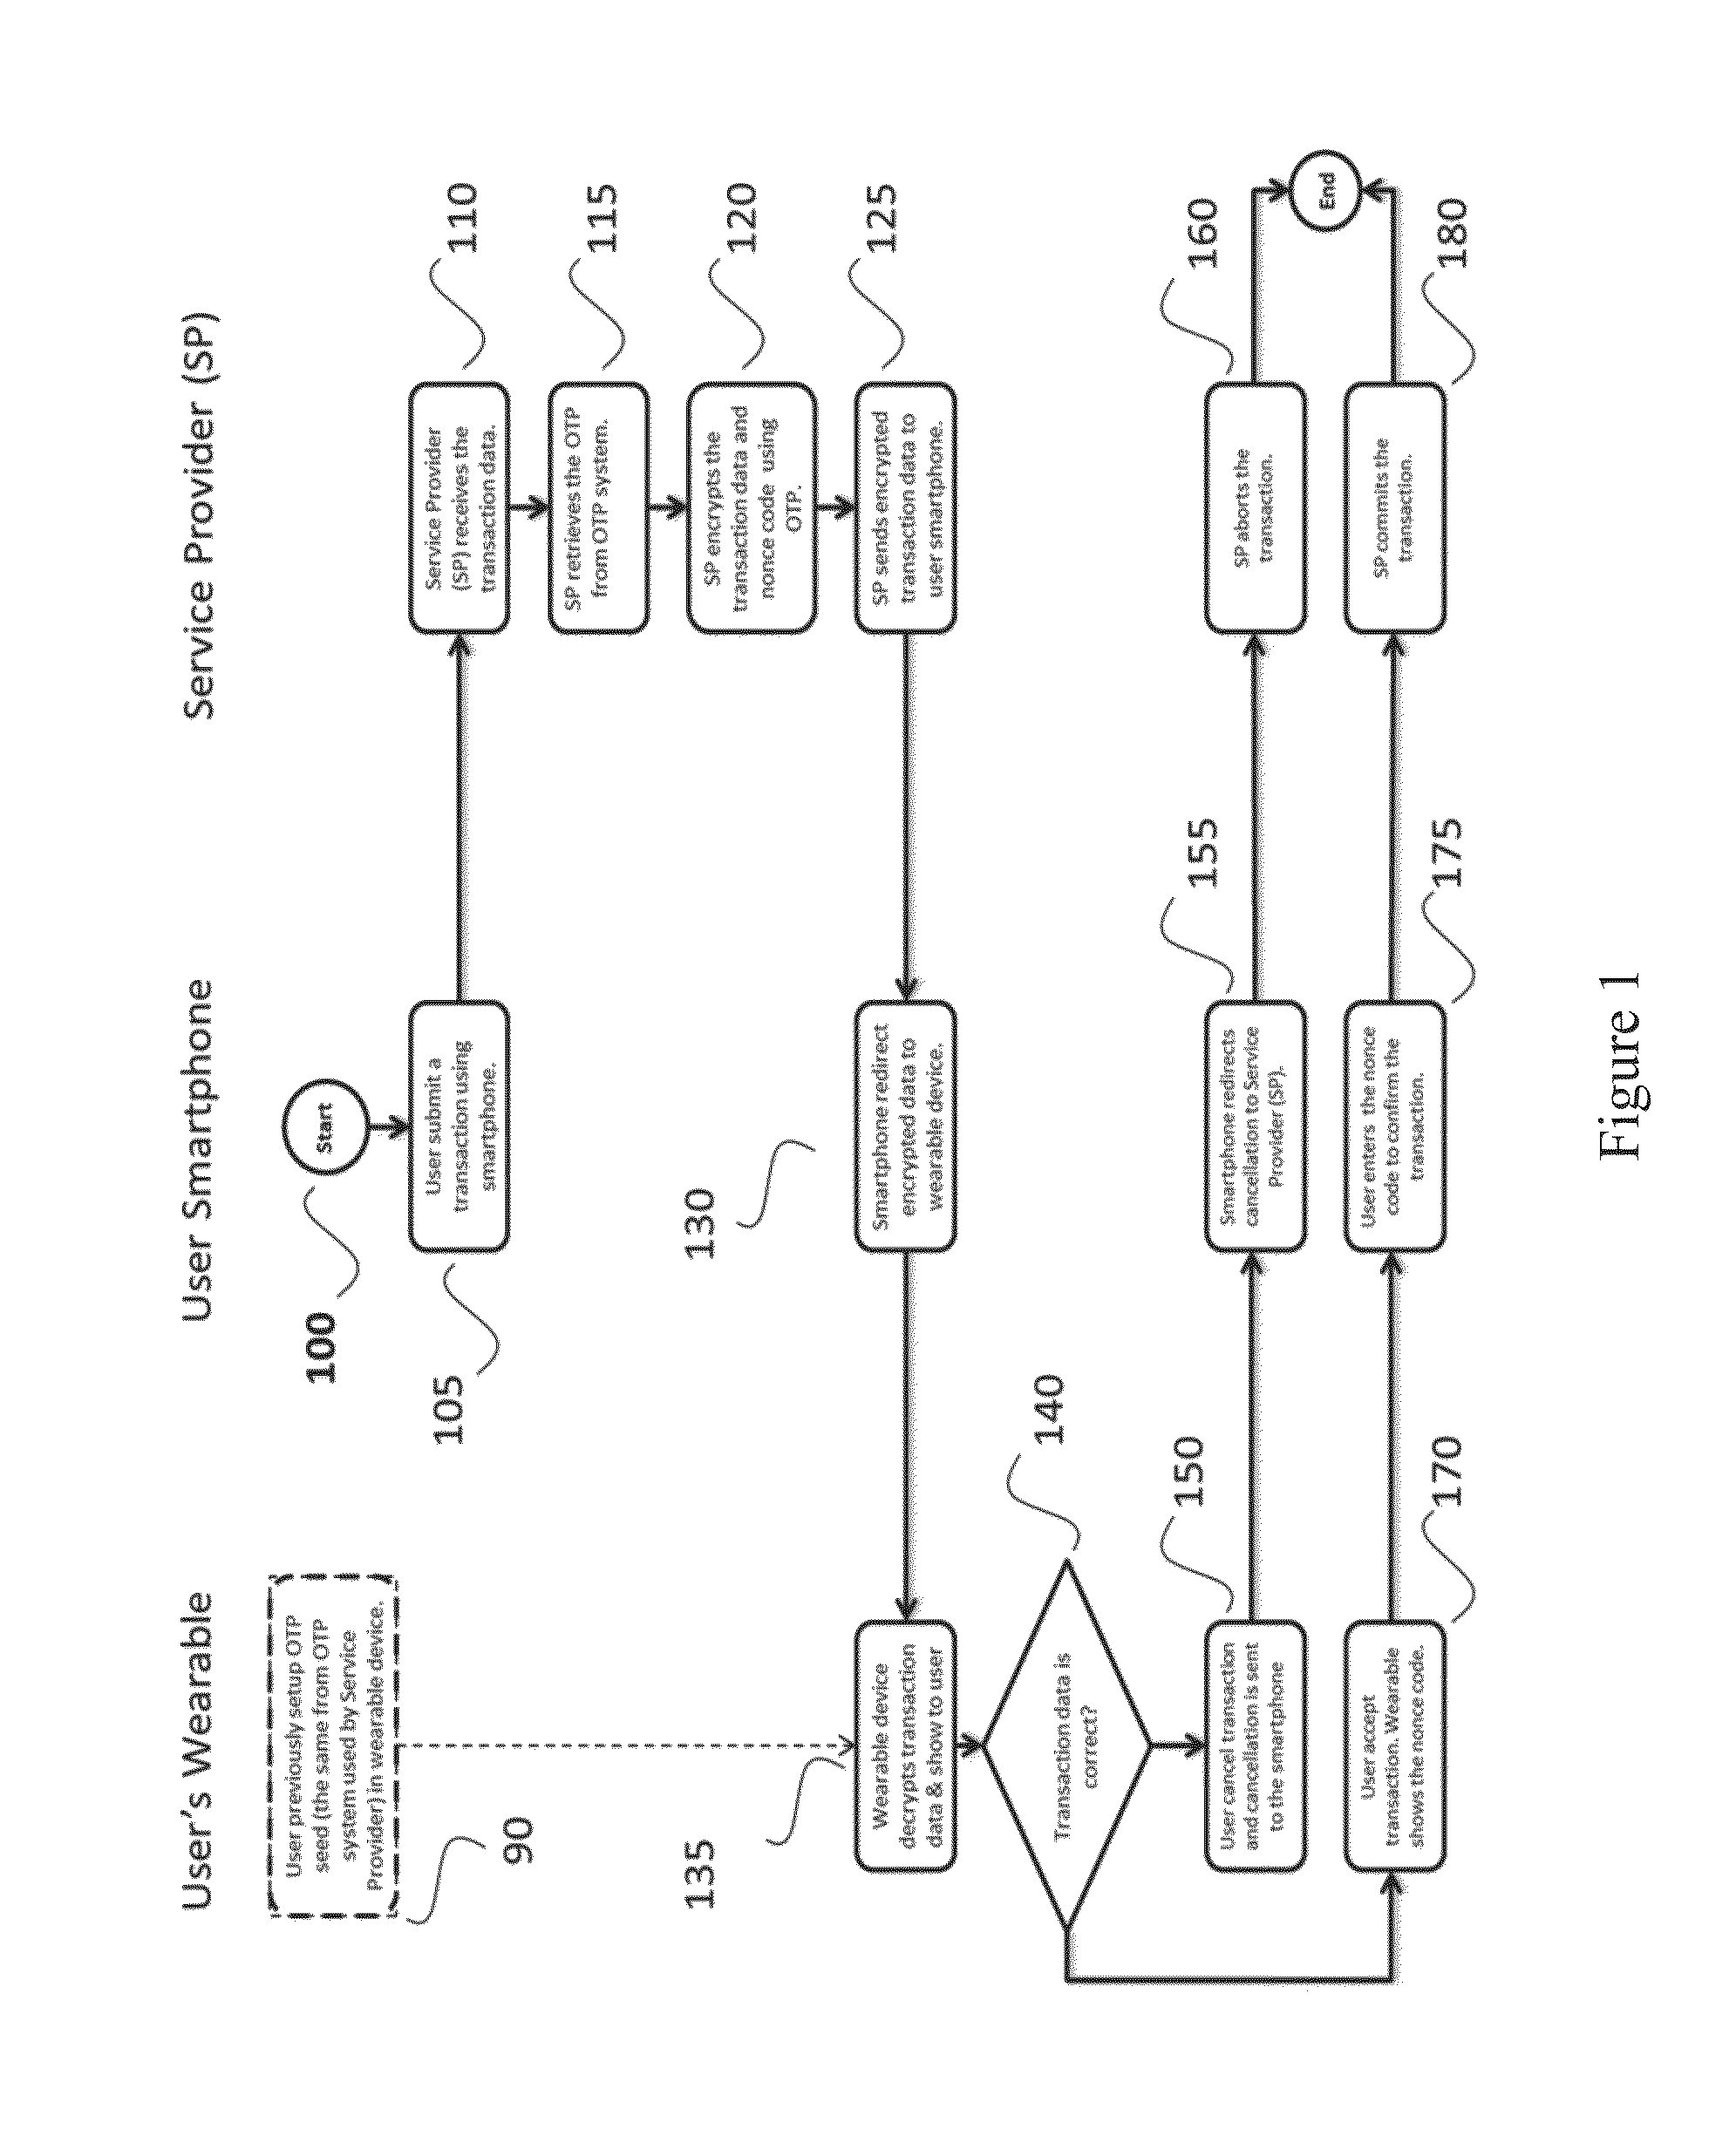 Method for multi-factor transaction authentication using wearable devices